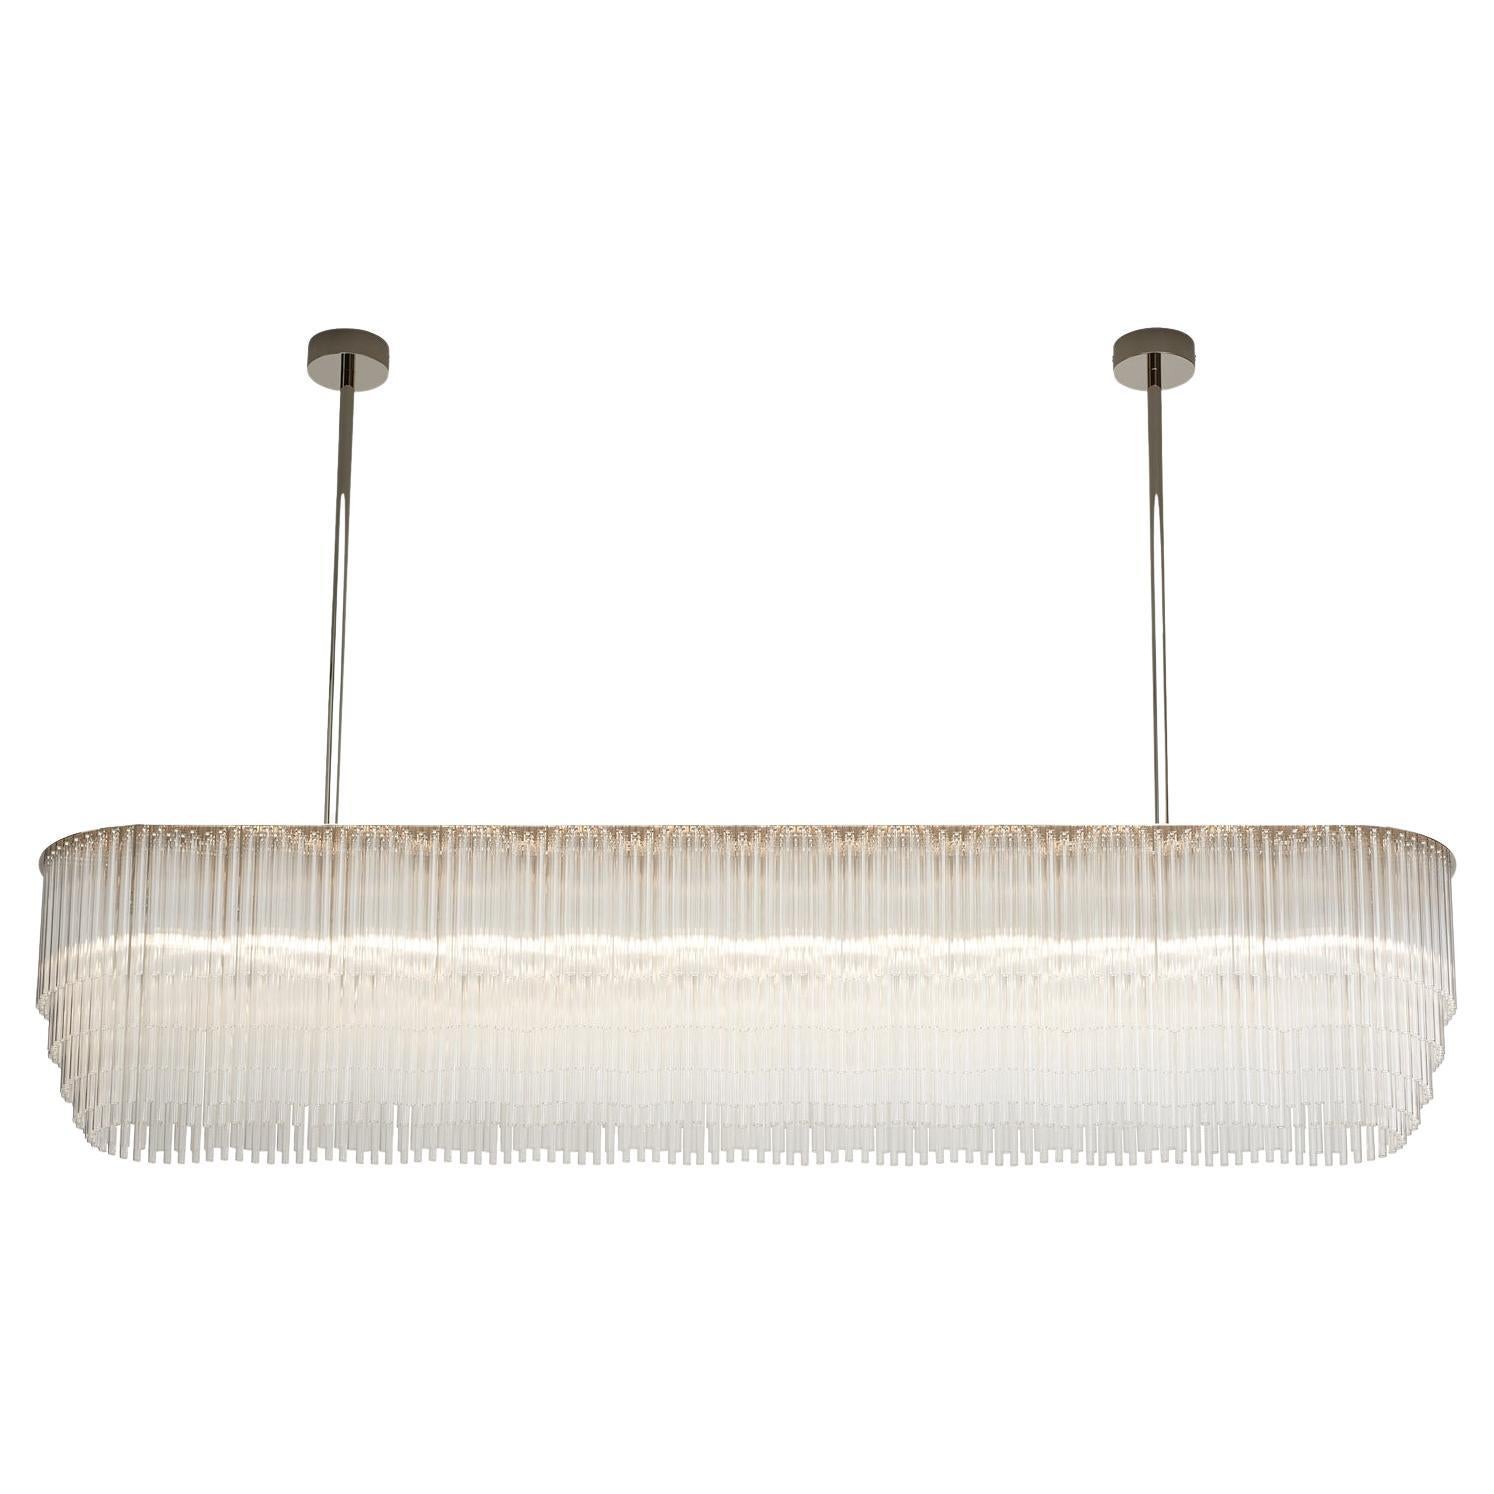 Linear Chandelier 1915mm / 75.25" in Polished Chrome with Tiered Glass Profile For Sale